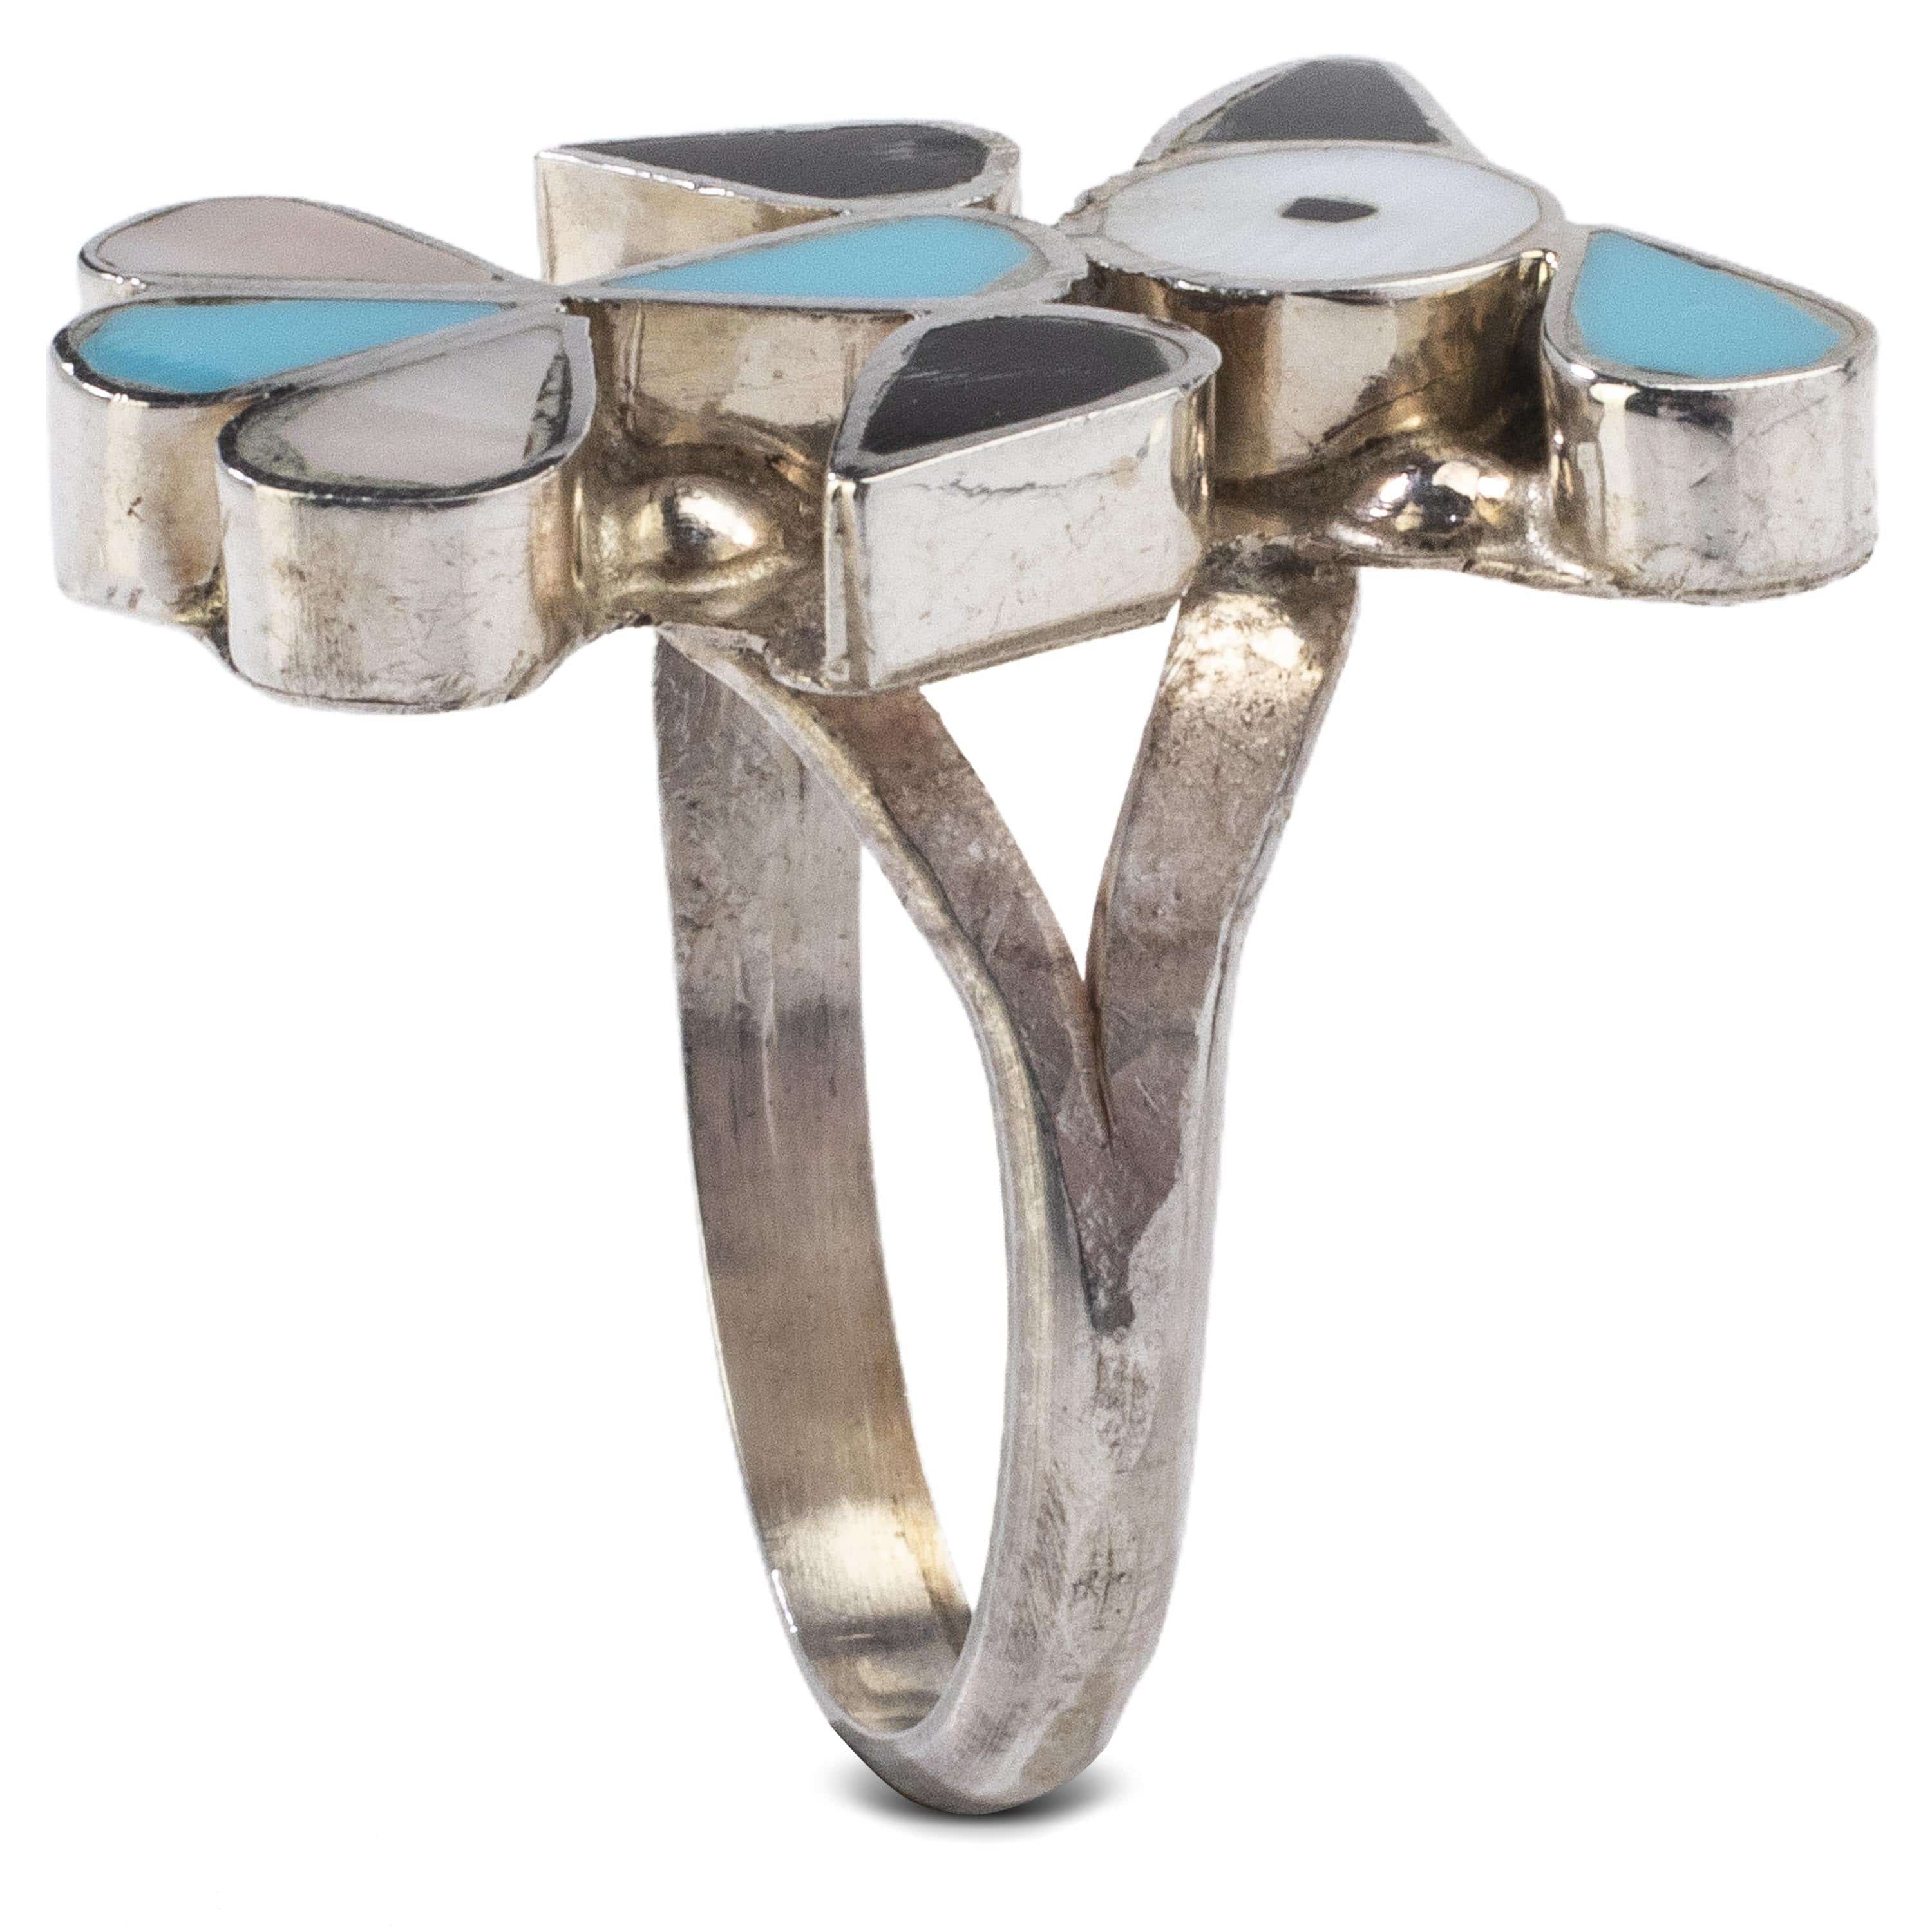 Kalifano Native American Jewelry 6 Pino Yunie Zuni Peyote Bird with Mother of Pearl, Black Onyx, and Turquoise USA Native American Made 925 Sterling Silver Ring NAR200.027.6